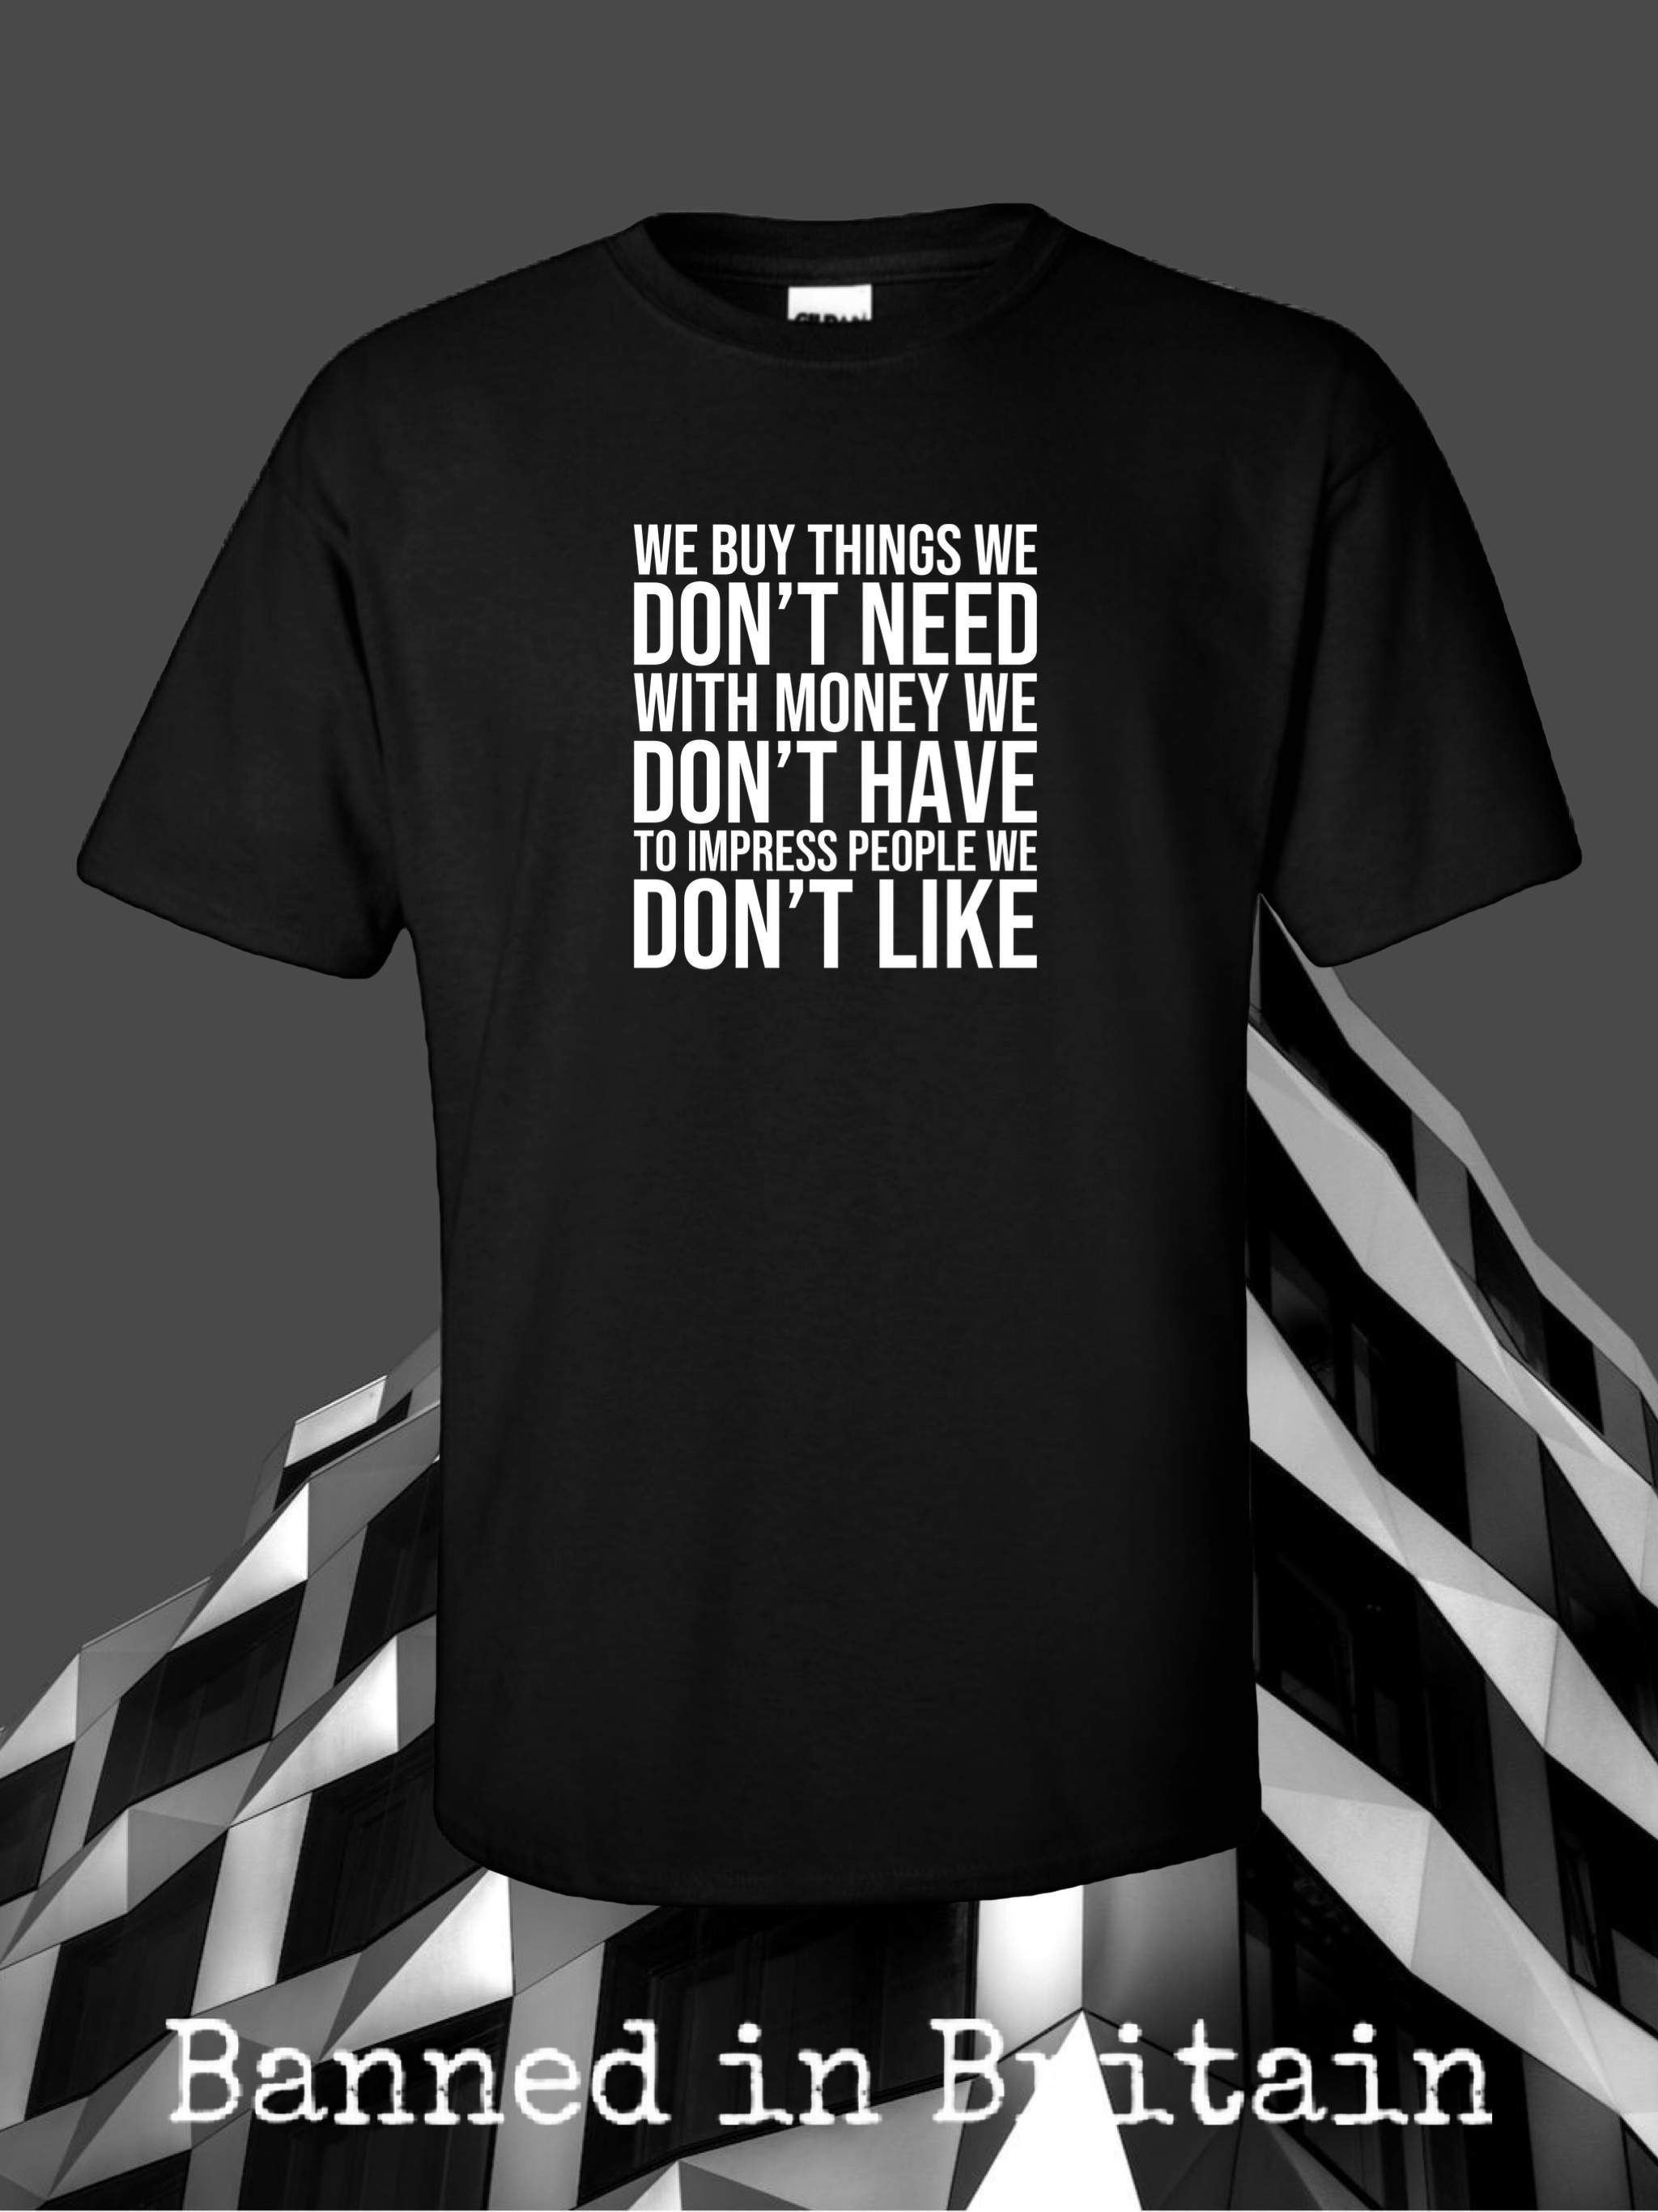 We Buy Things We Don't Need T-shirt